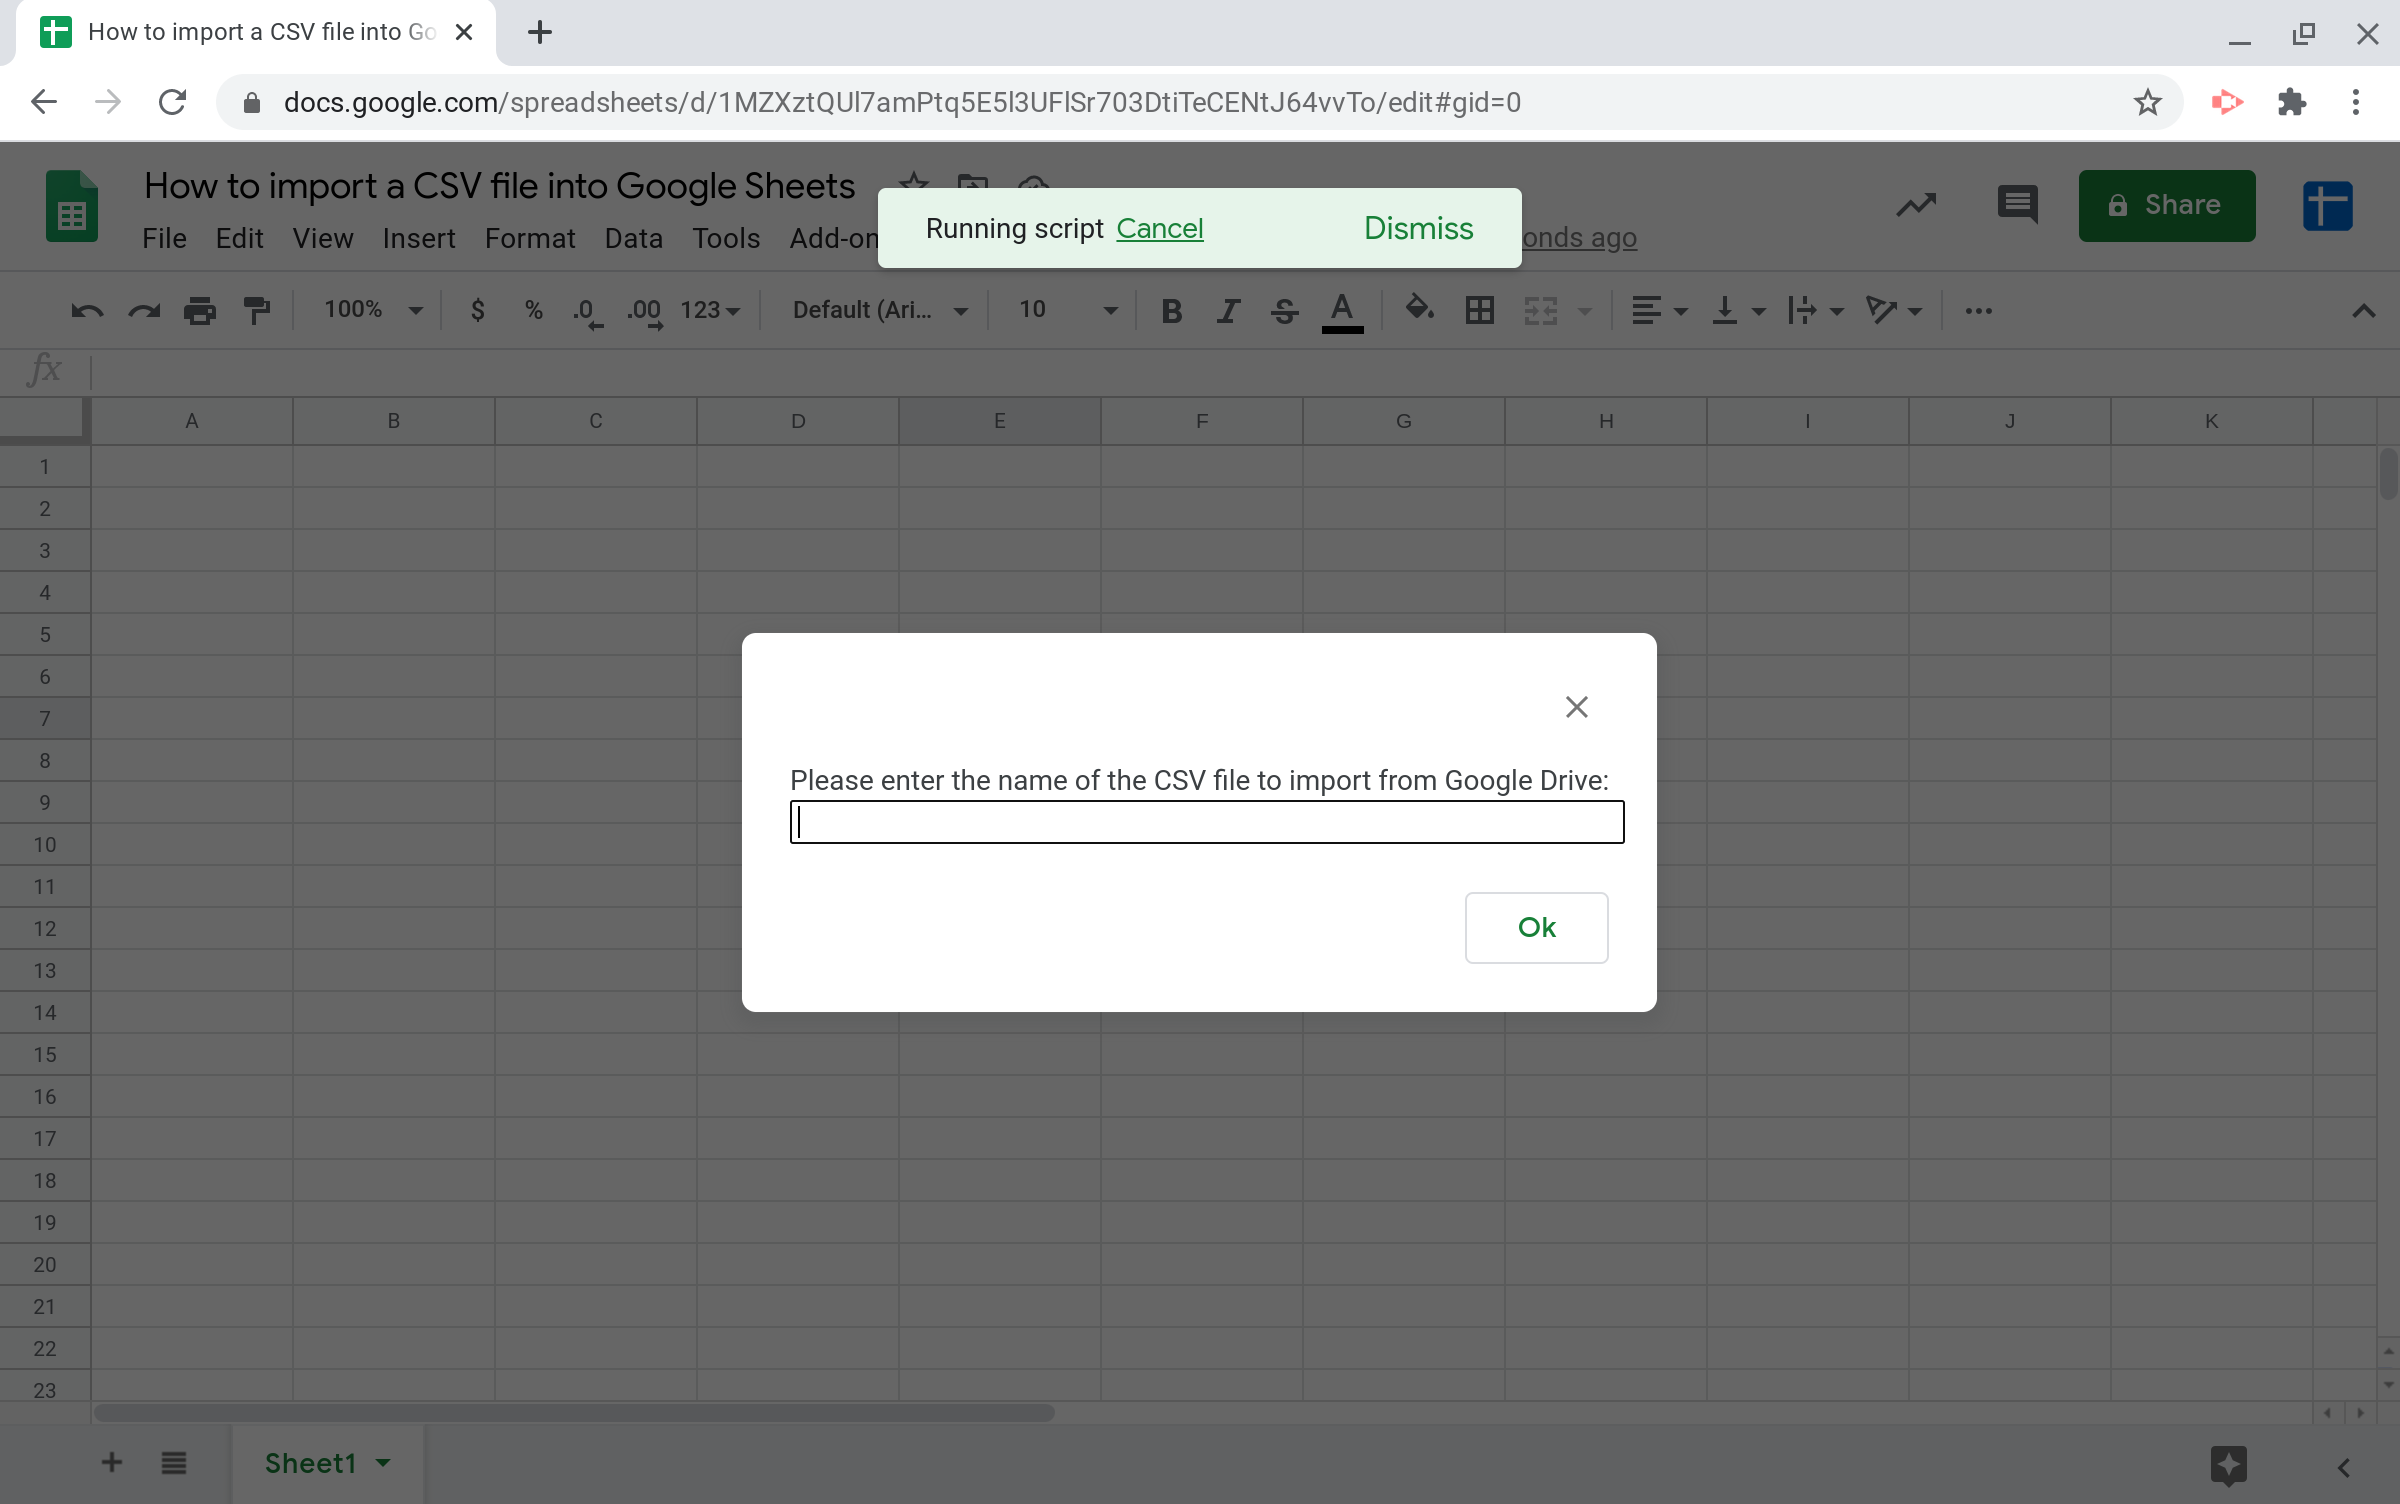 Screenshot of a prompt dialog asking the user to enter the name of the CSV file they want to import from Google Drive.